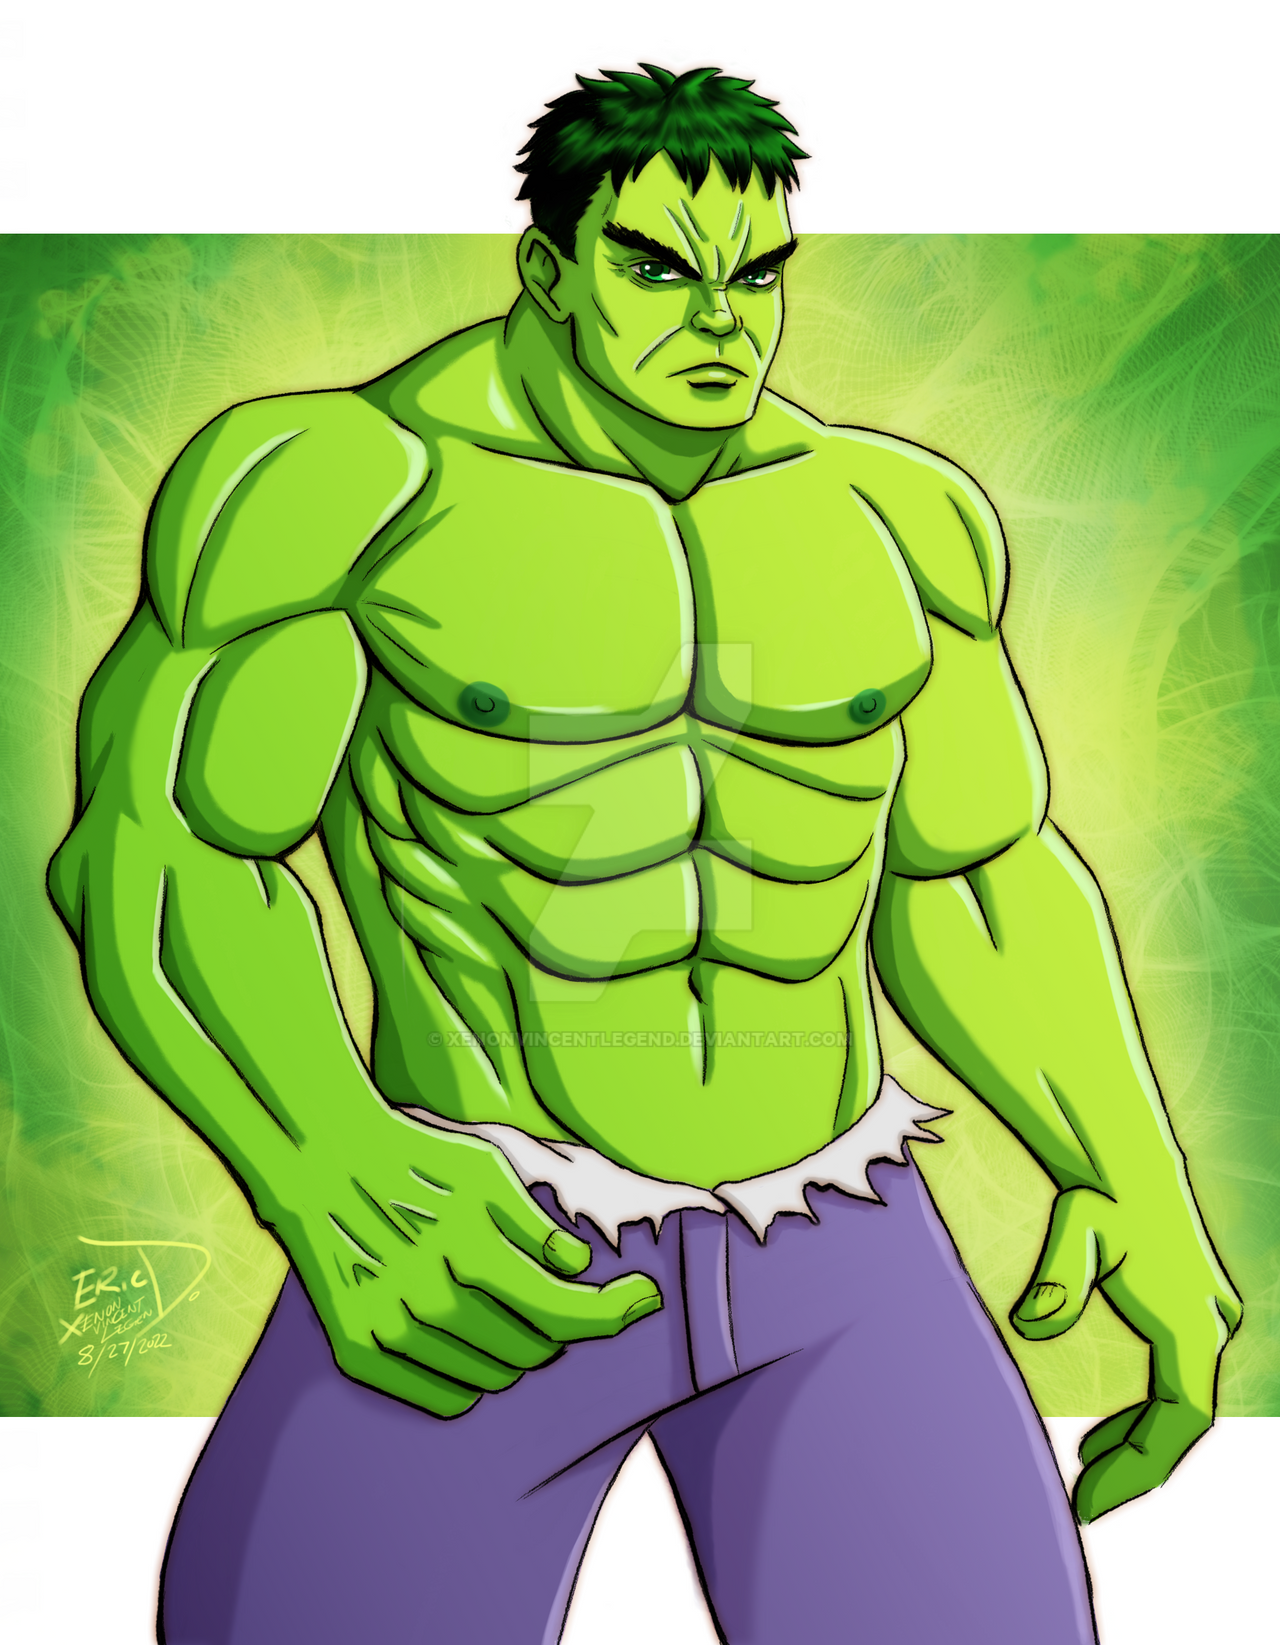 The Incredible Hulk by XenonVincentLegend on DeviantArt